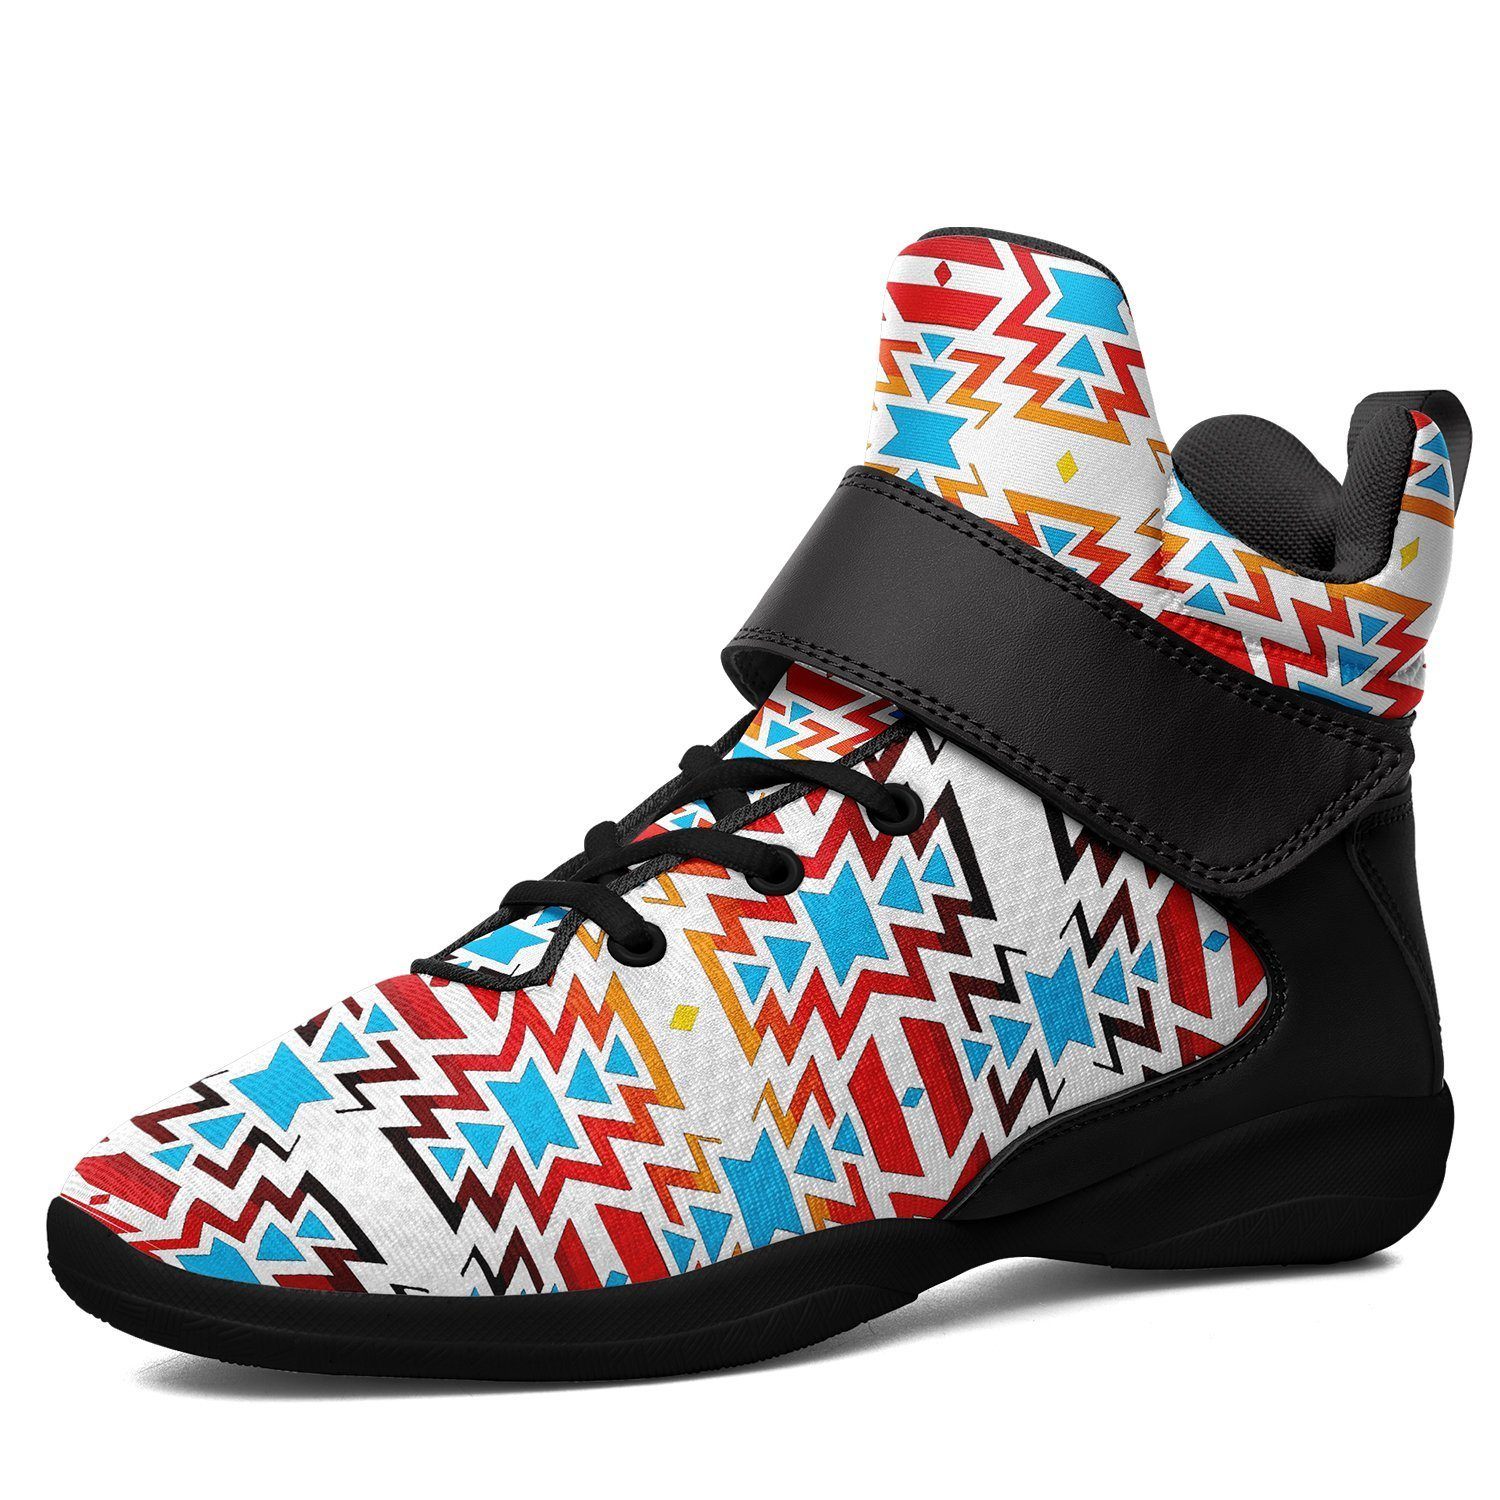 Fire Colors and Sky Ipottaa Basketball / Sport High Top Shoes - Black Sole 49 Dzine US Men 7 / EUR 40 Black Sole with Black Strap 